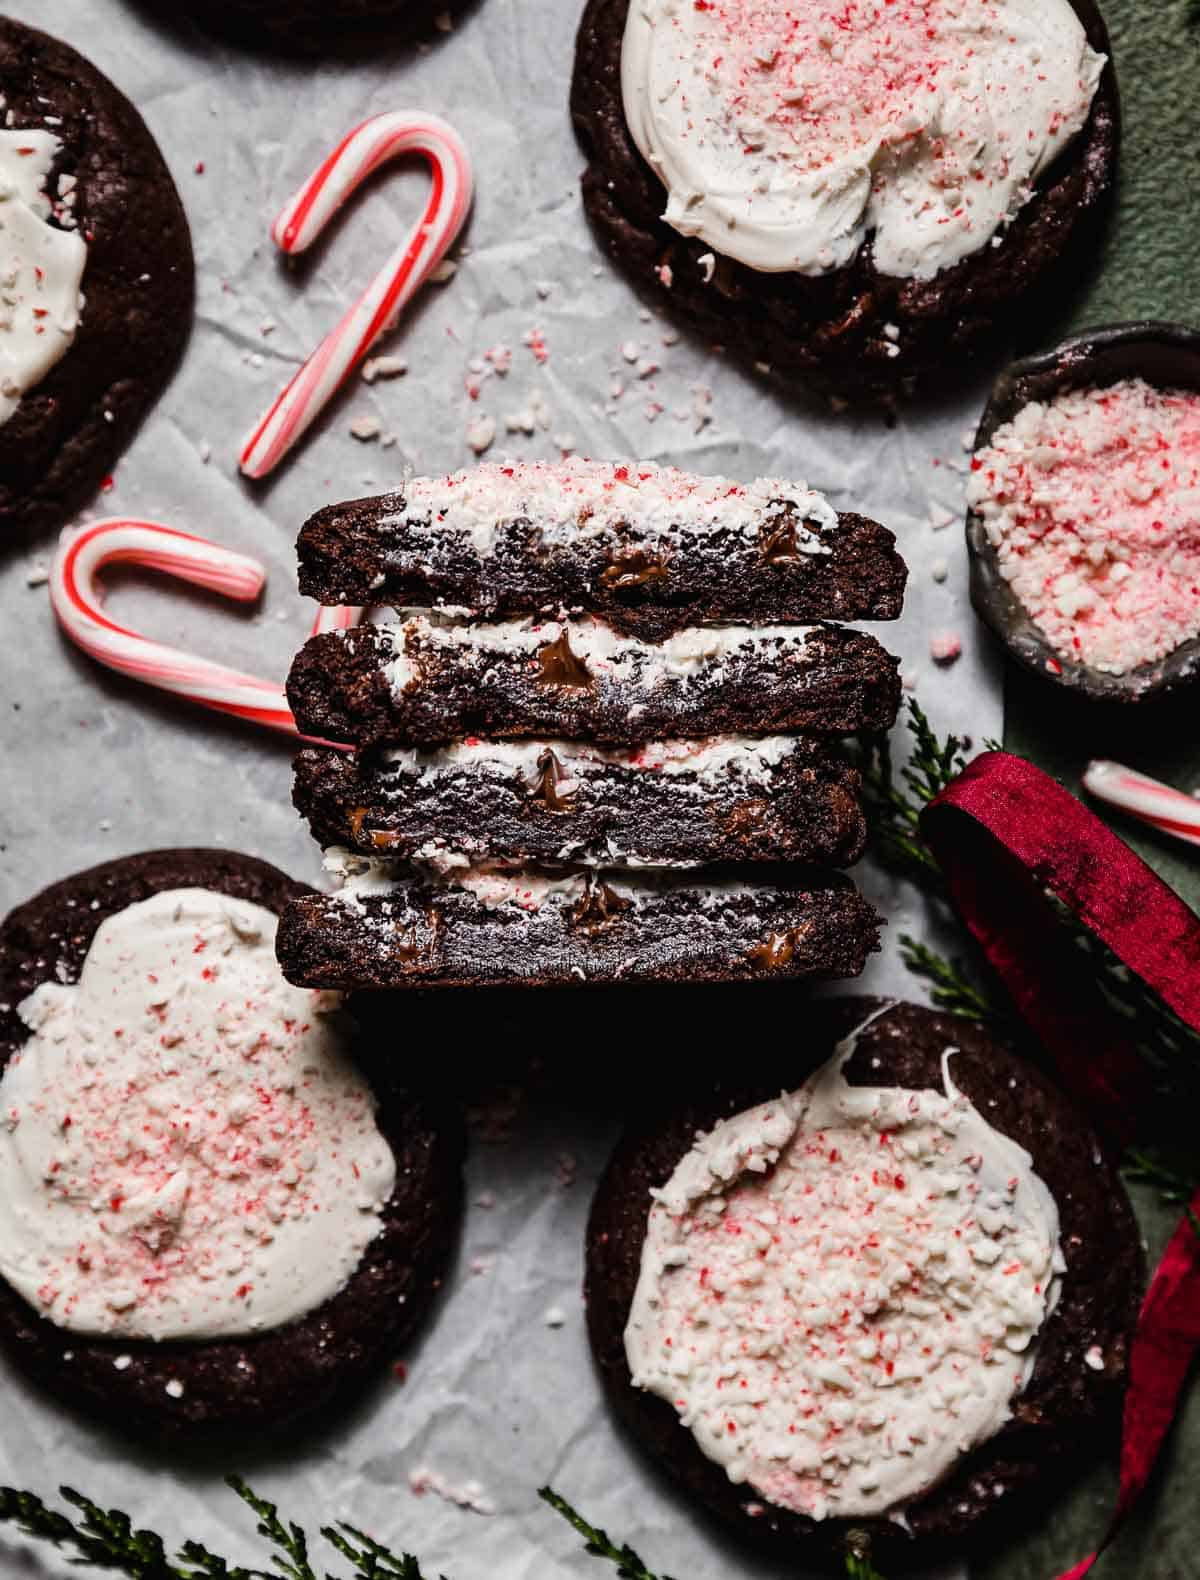 White chocolate and candy cane topped chocolate Peppermint Bark Cookies.